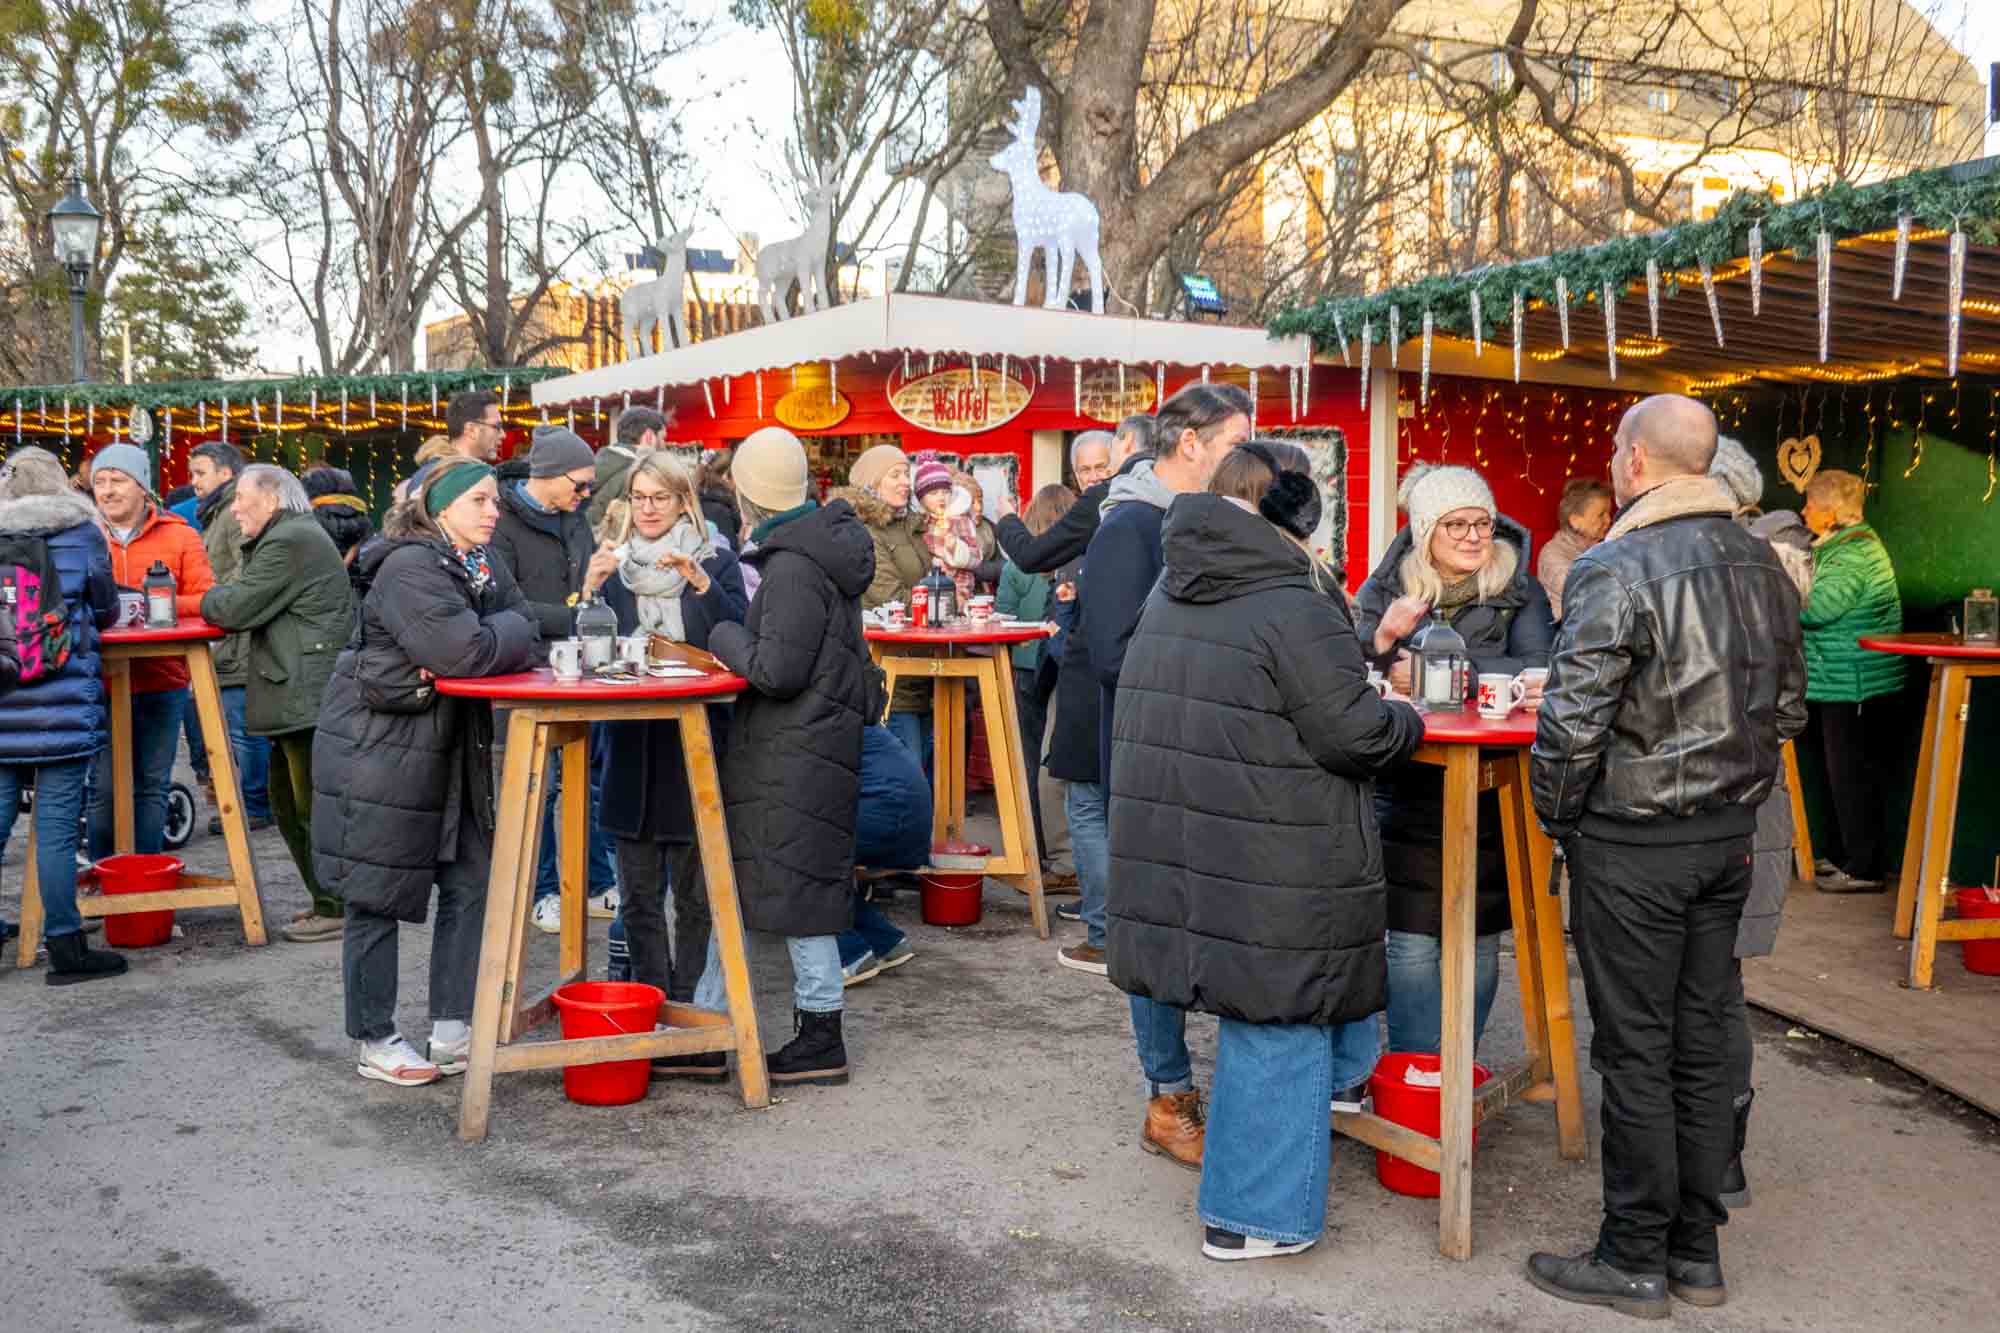 People standing at tables at a food vendor decorated with icicles and garland.